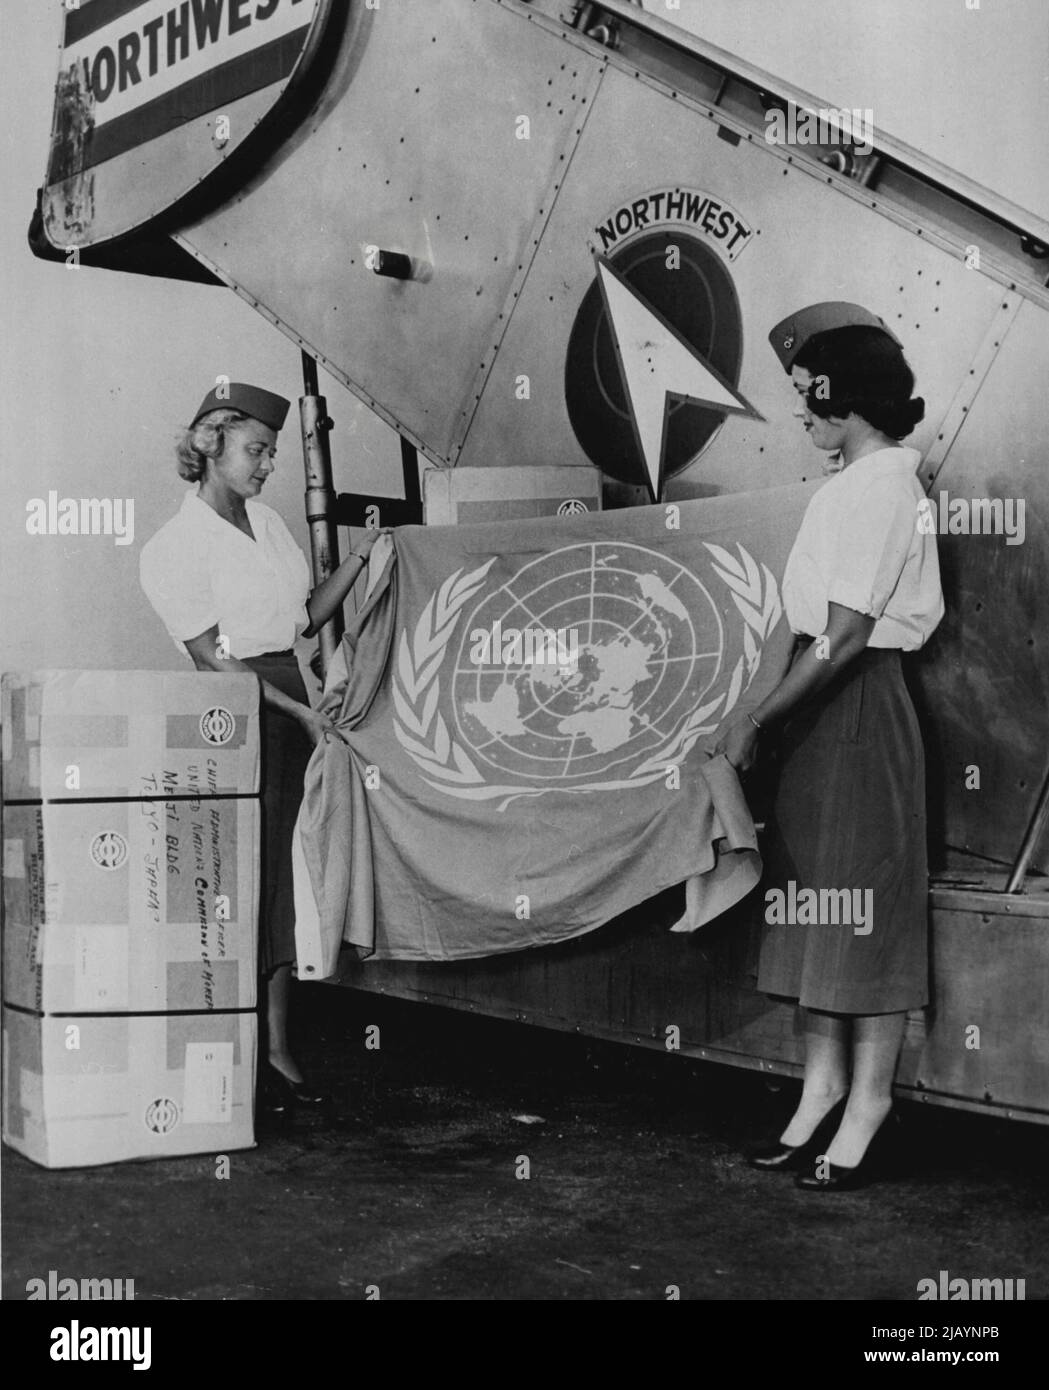 Shipments of blue and white United Nations flags are being made to the unified United Nations forces assisting the Republic of Korea in defense against the North Korean Communist invaders. The use of the UN flag was authorized recently by the UN Security Council. The photograph shows two U.S. airline hostesses holding one of the flags, which are being sent to General of the Army Douglas MacArthur, Commanding General for the unified United Nations forces, to be distributed to the Korean battlefronts. June 21, 1950. (Photo by United States Information Service). Stock Photo